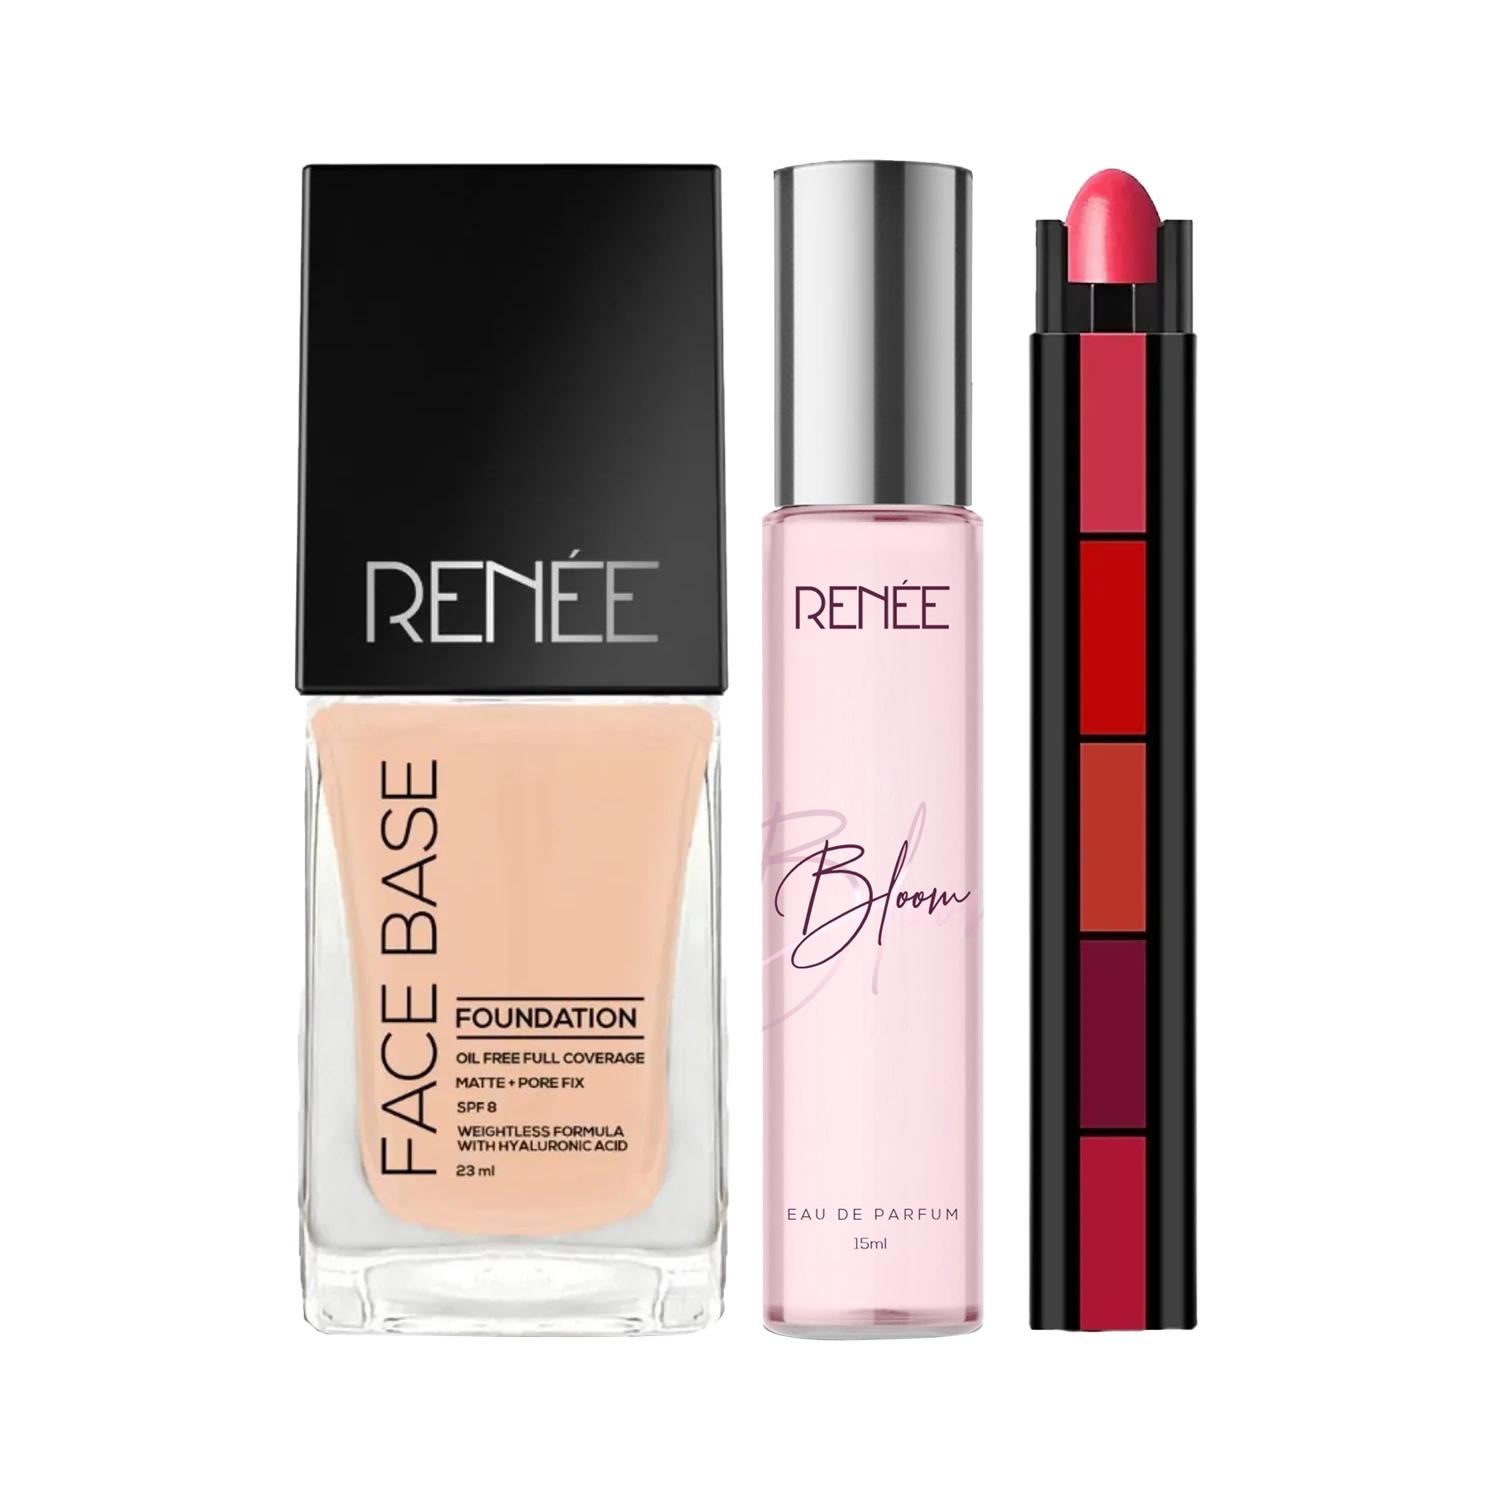 RENEE Chic Palette Pairing , Go-To Makeup Combo - Lipstick + Foundation + Perfume